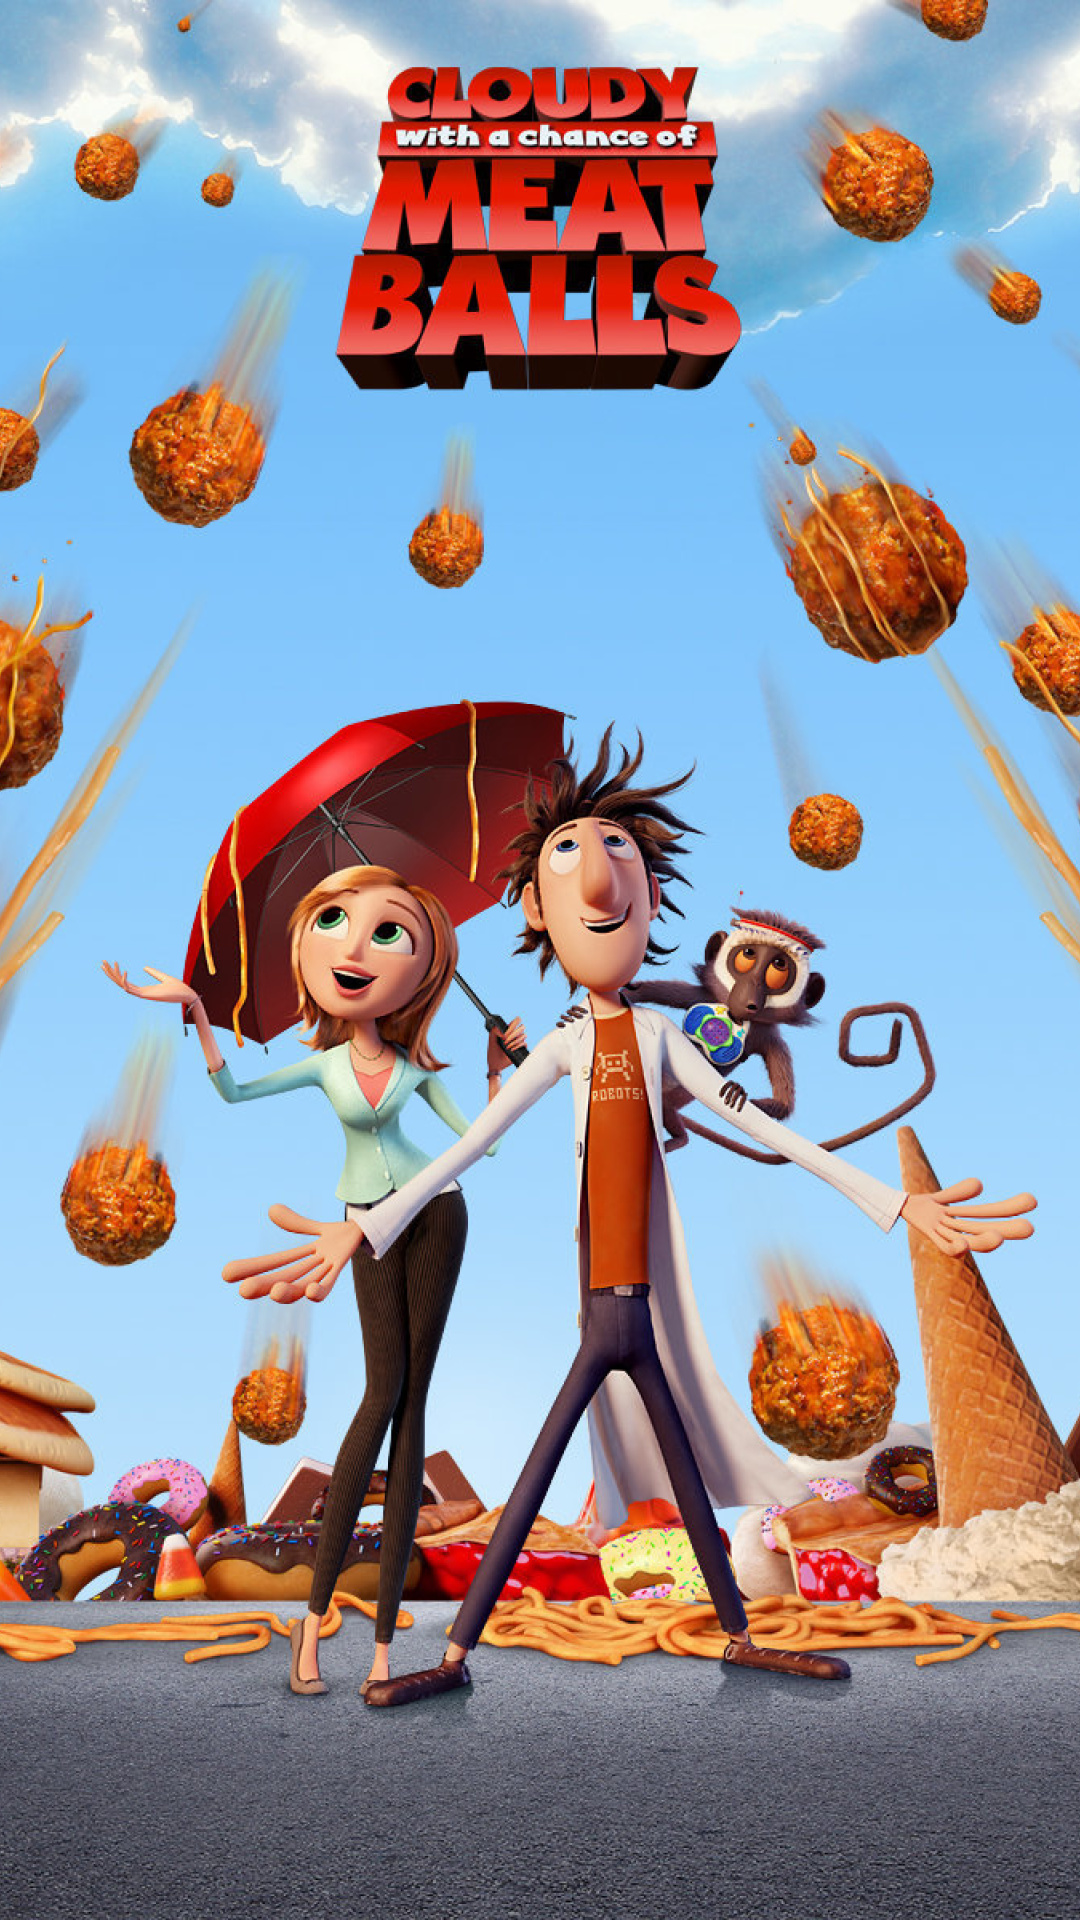 Sfondi Cloudy with a Chance of Meatballs 1080x1920